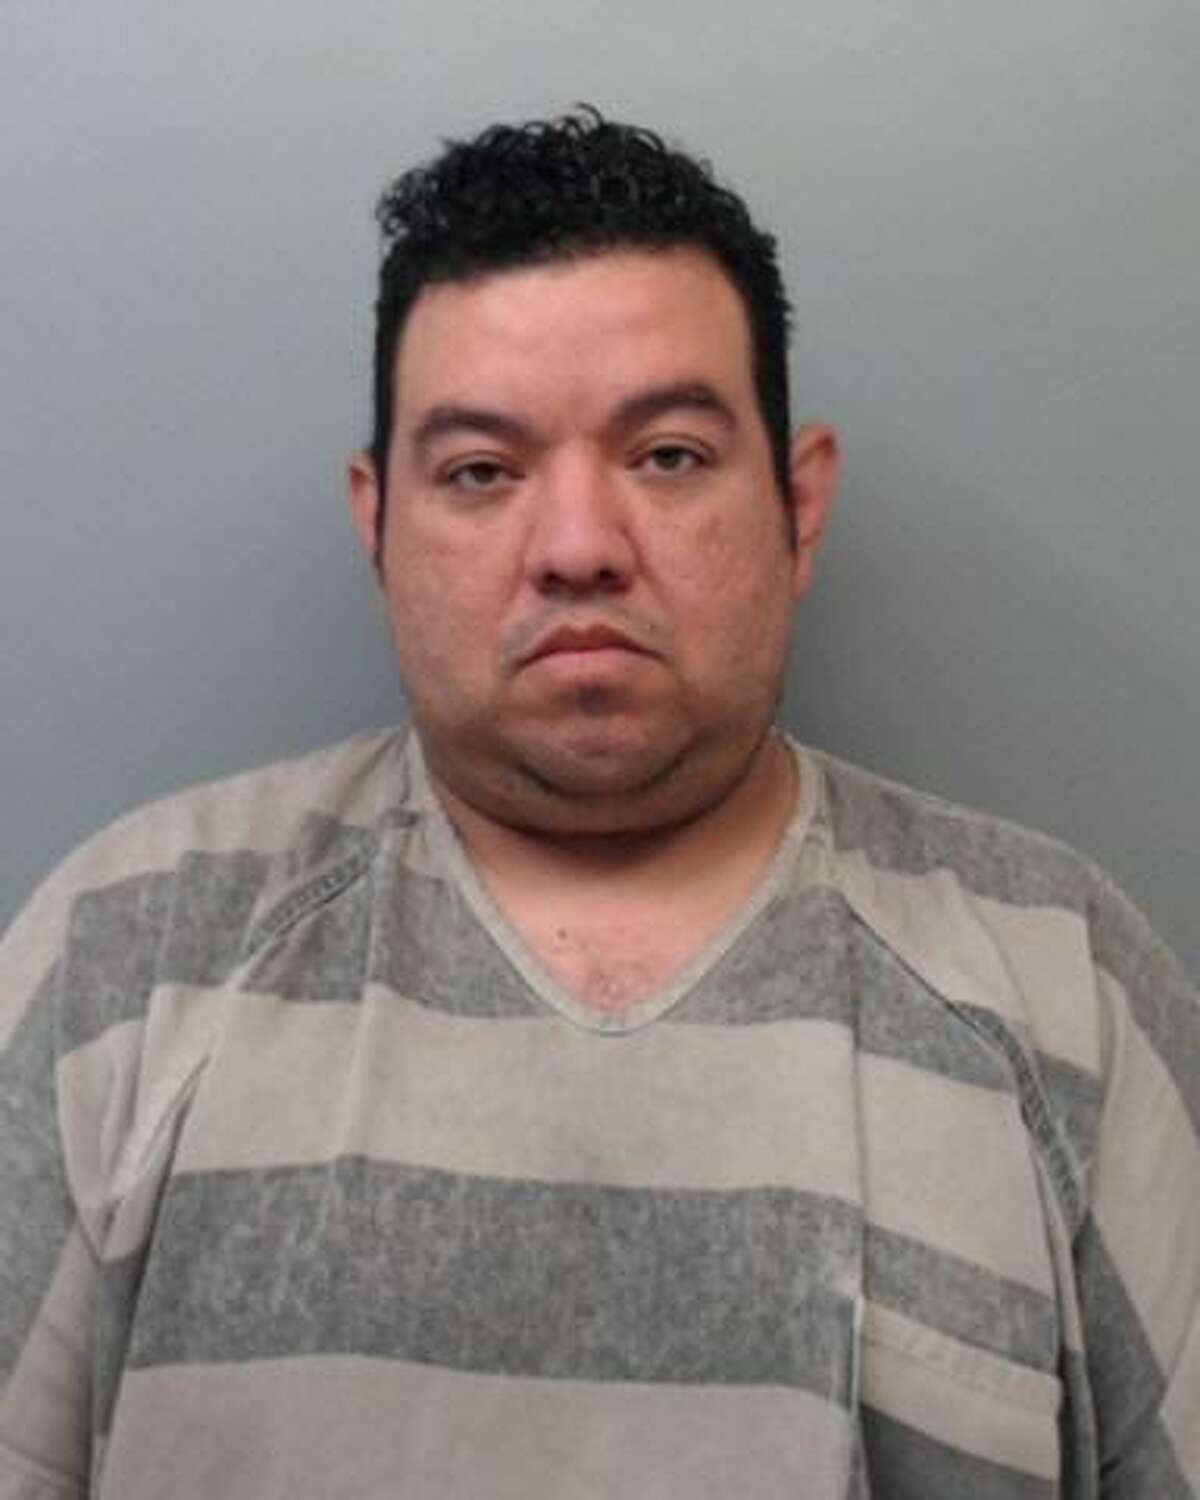 Jose Rodolfo Leyva,33, was charged with aggravated assault with a deadly weapon (motor vehicle).